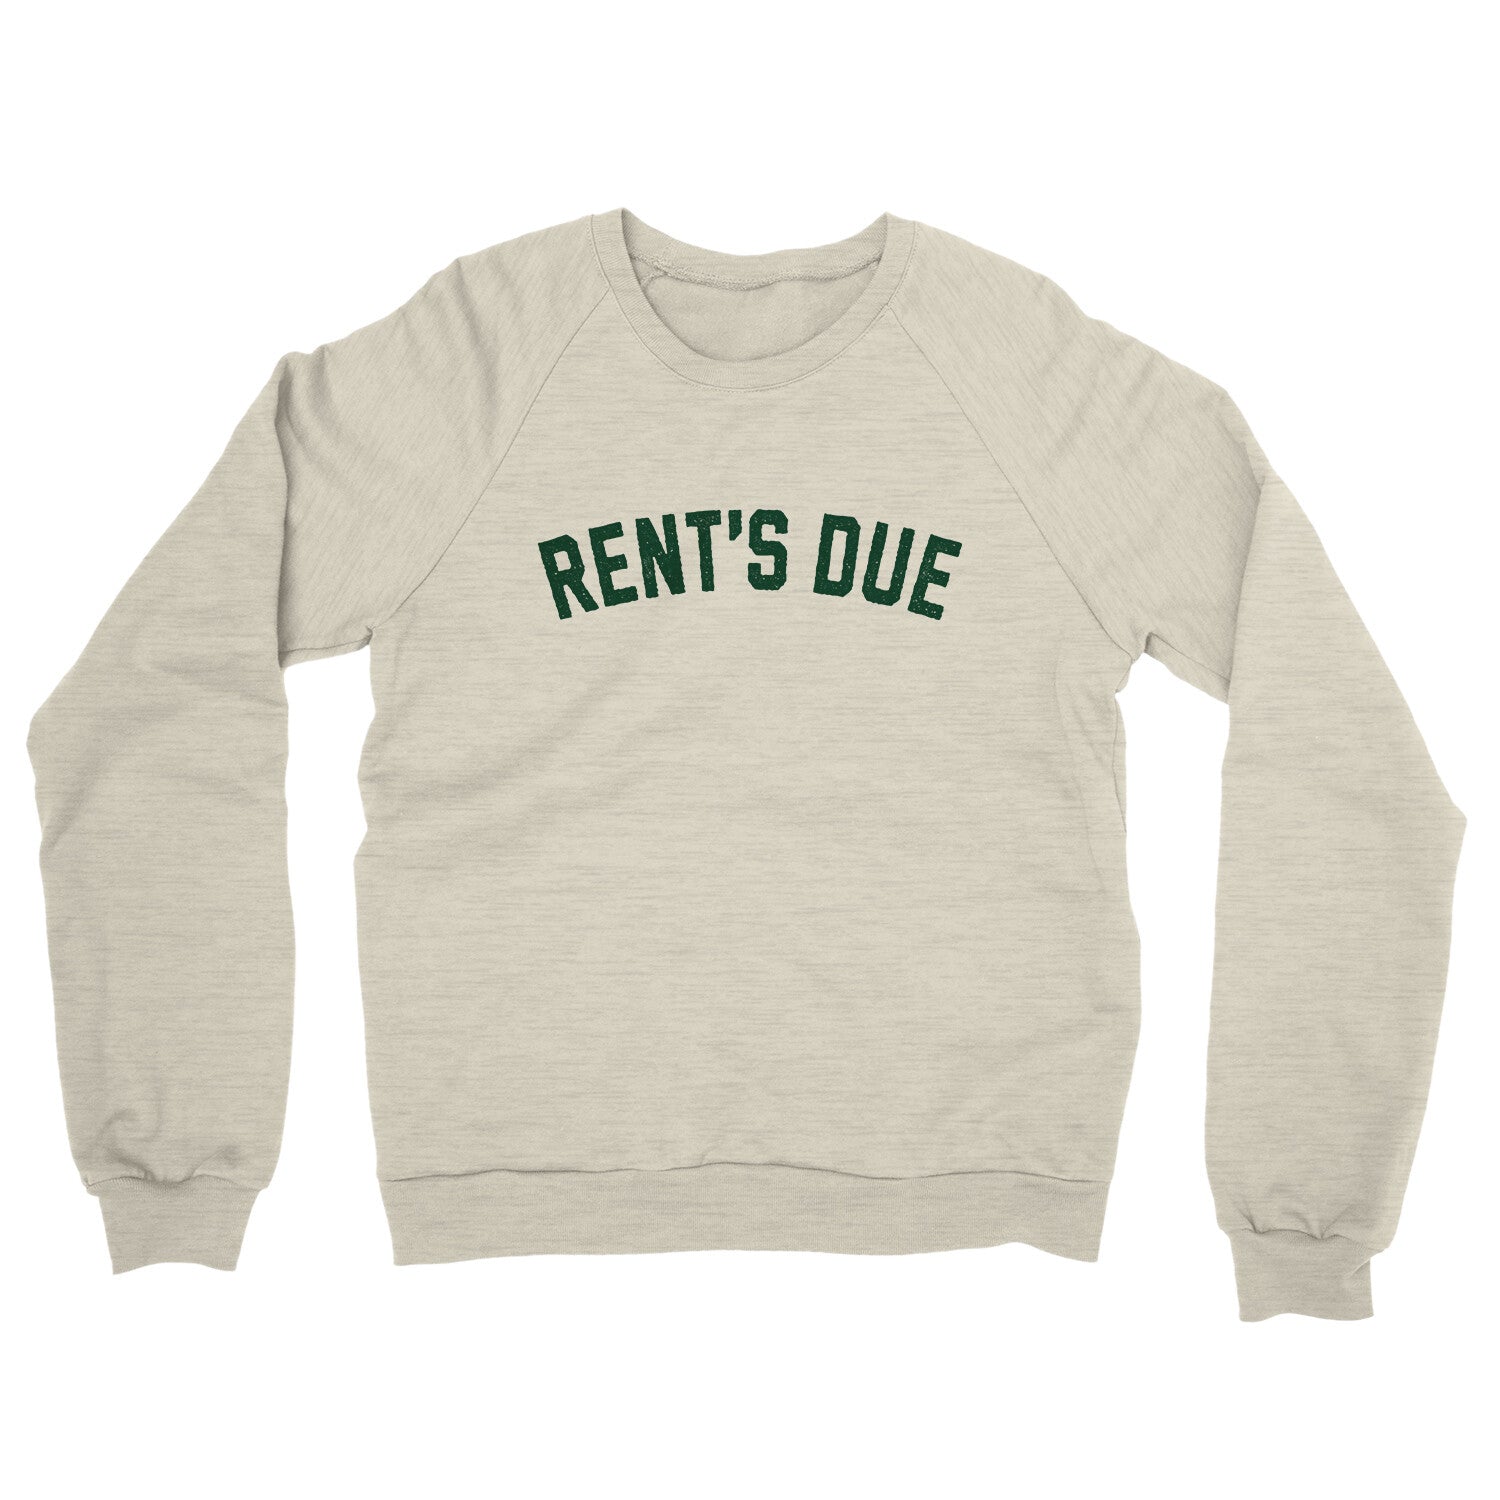 Rent's Due in Heather Oatmeal Color